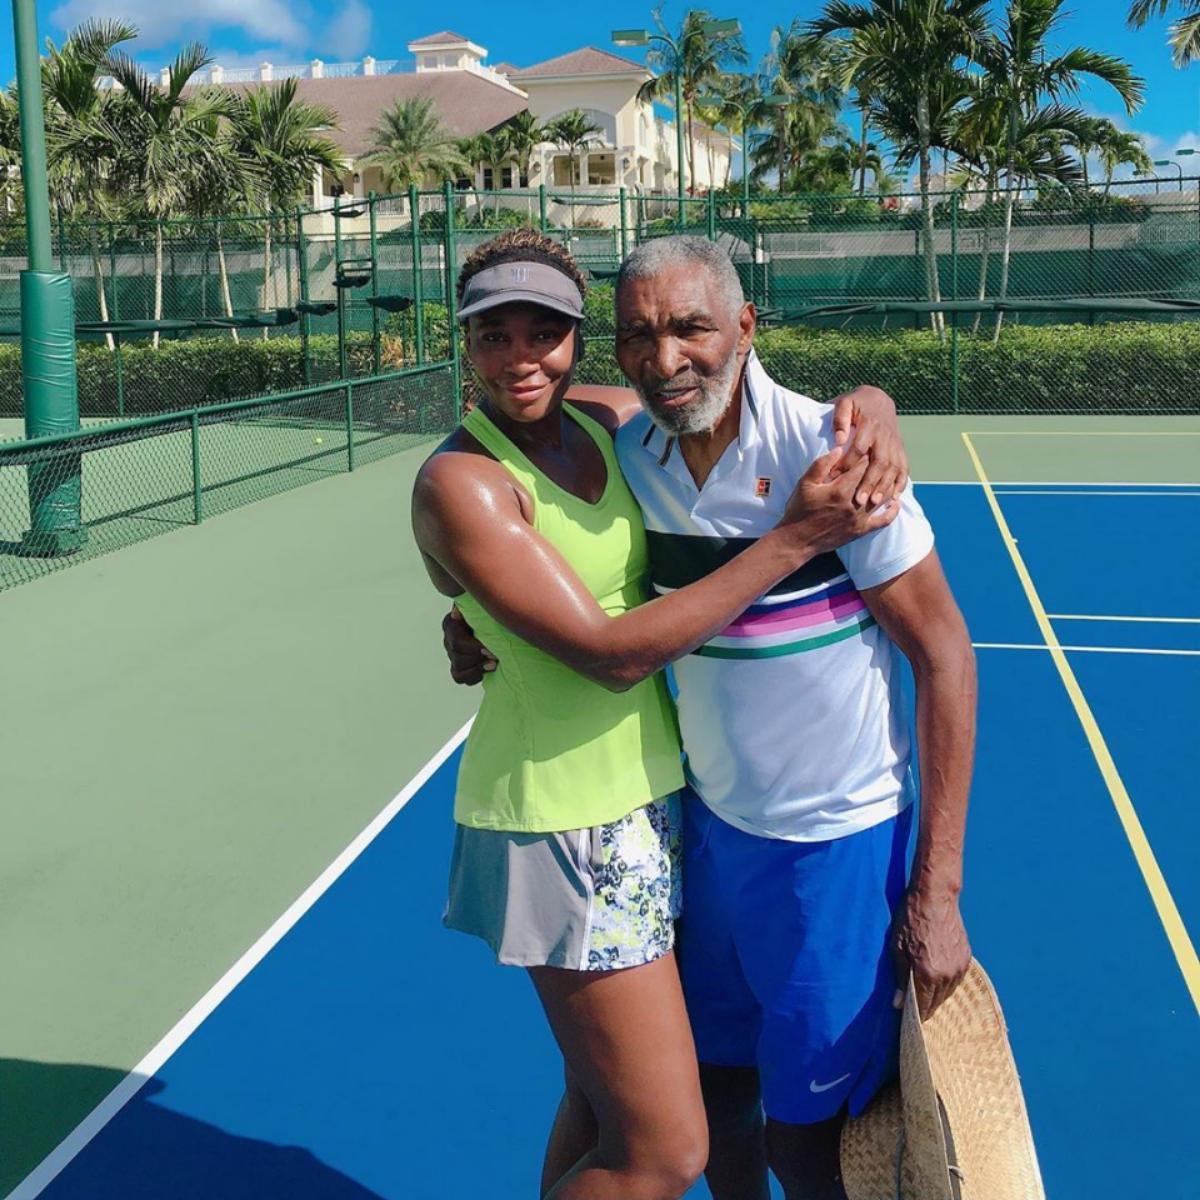 Venus Williams Gushes About Father Attending Her Practices